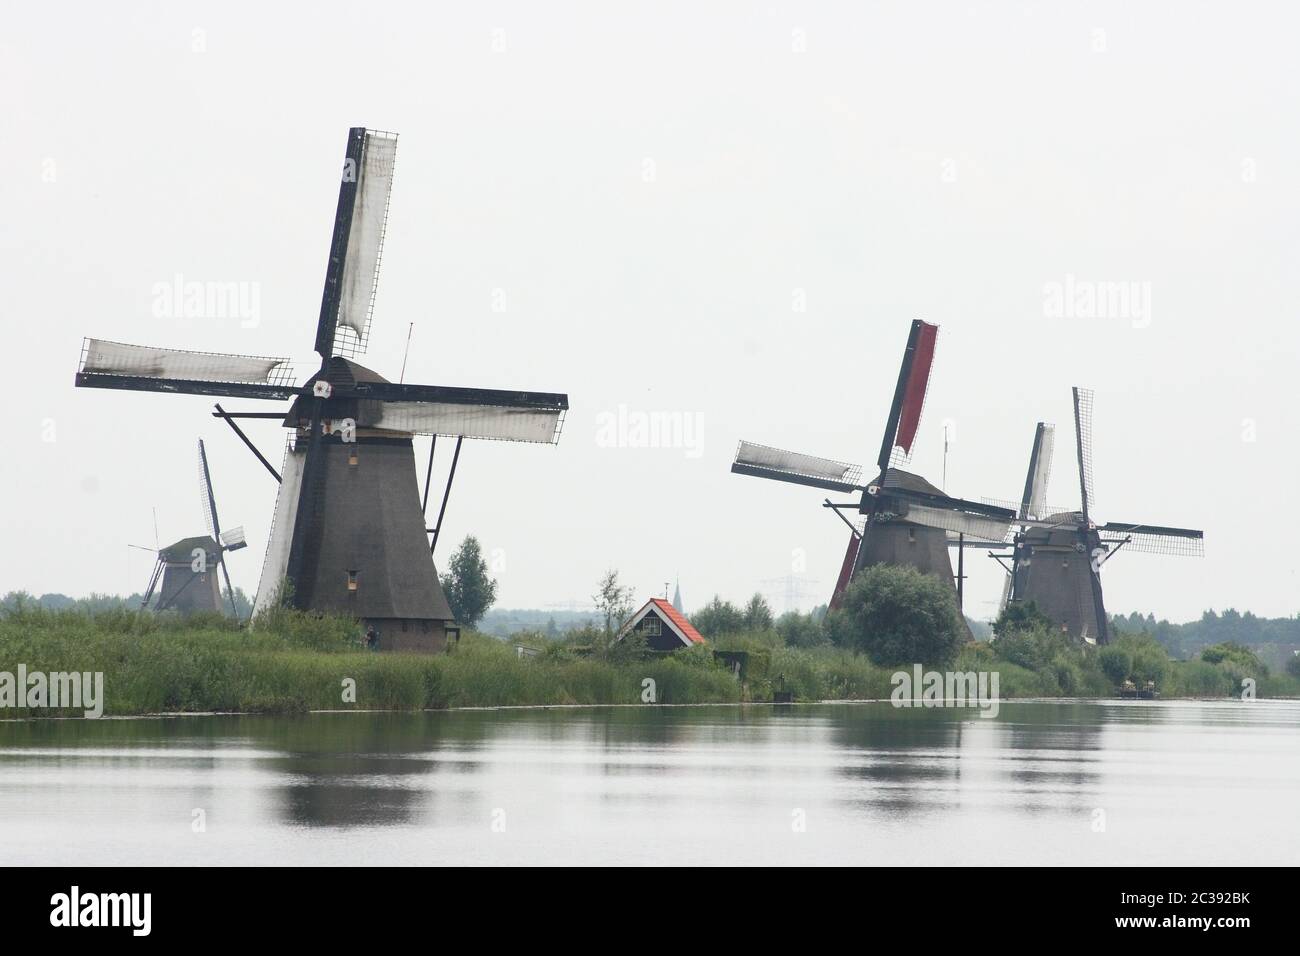 A beautiful, old, historic windmill, with four wings Stock Photo